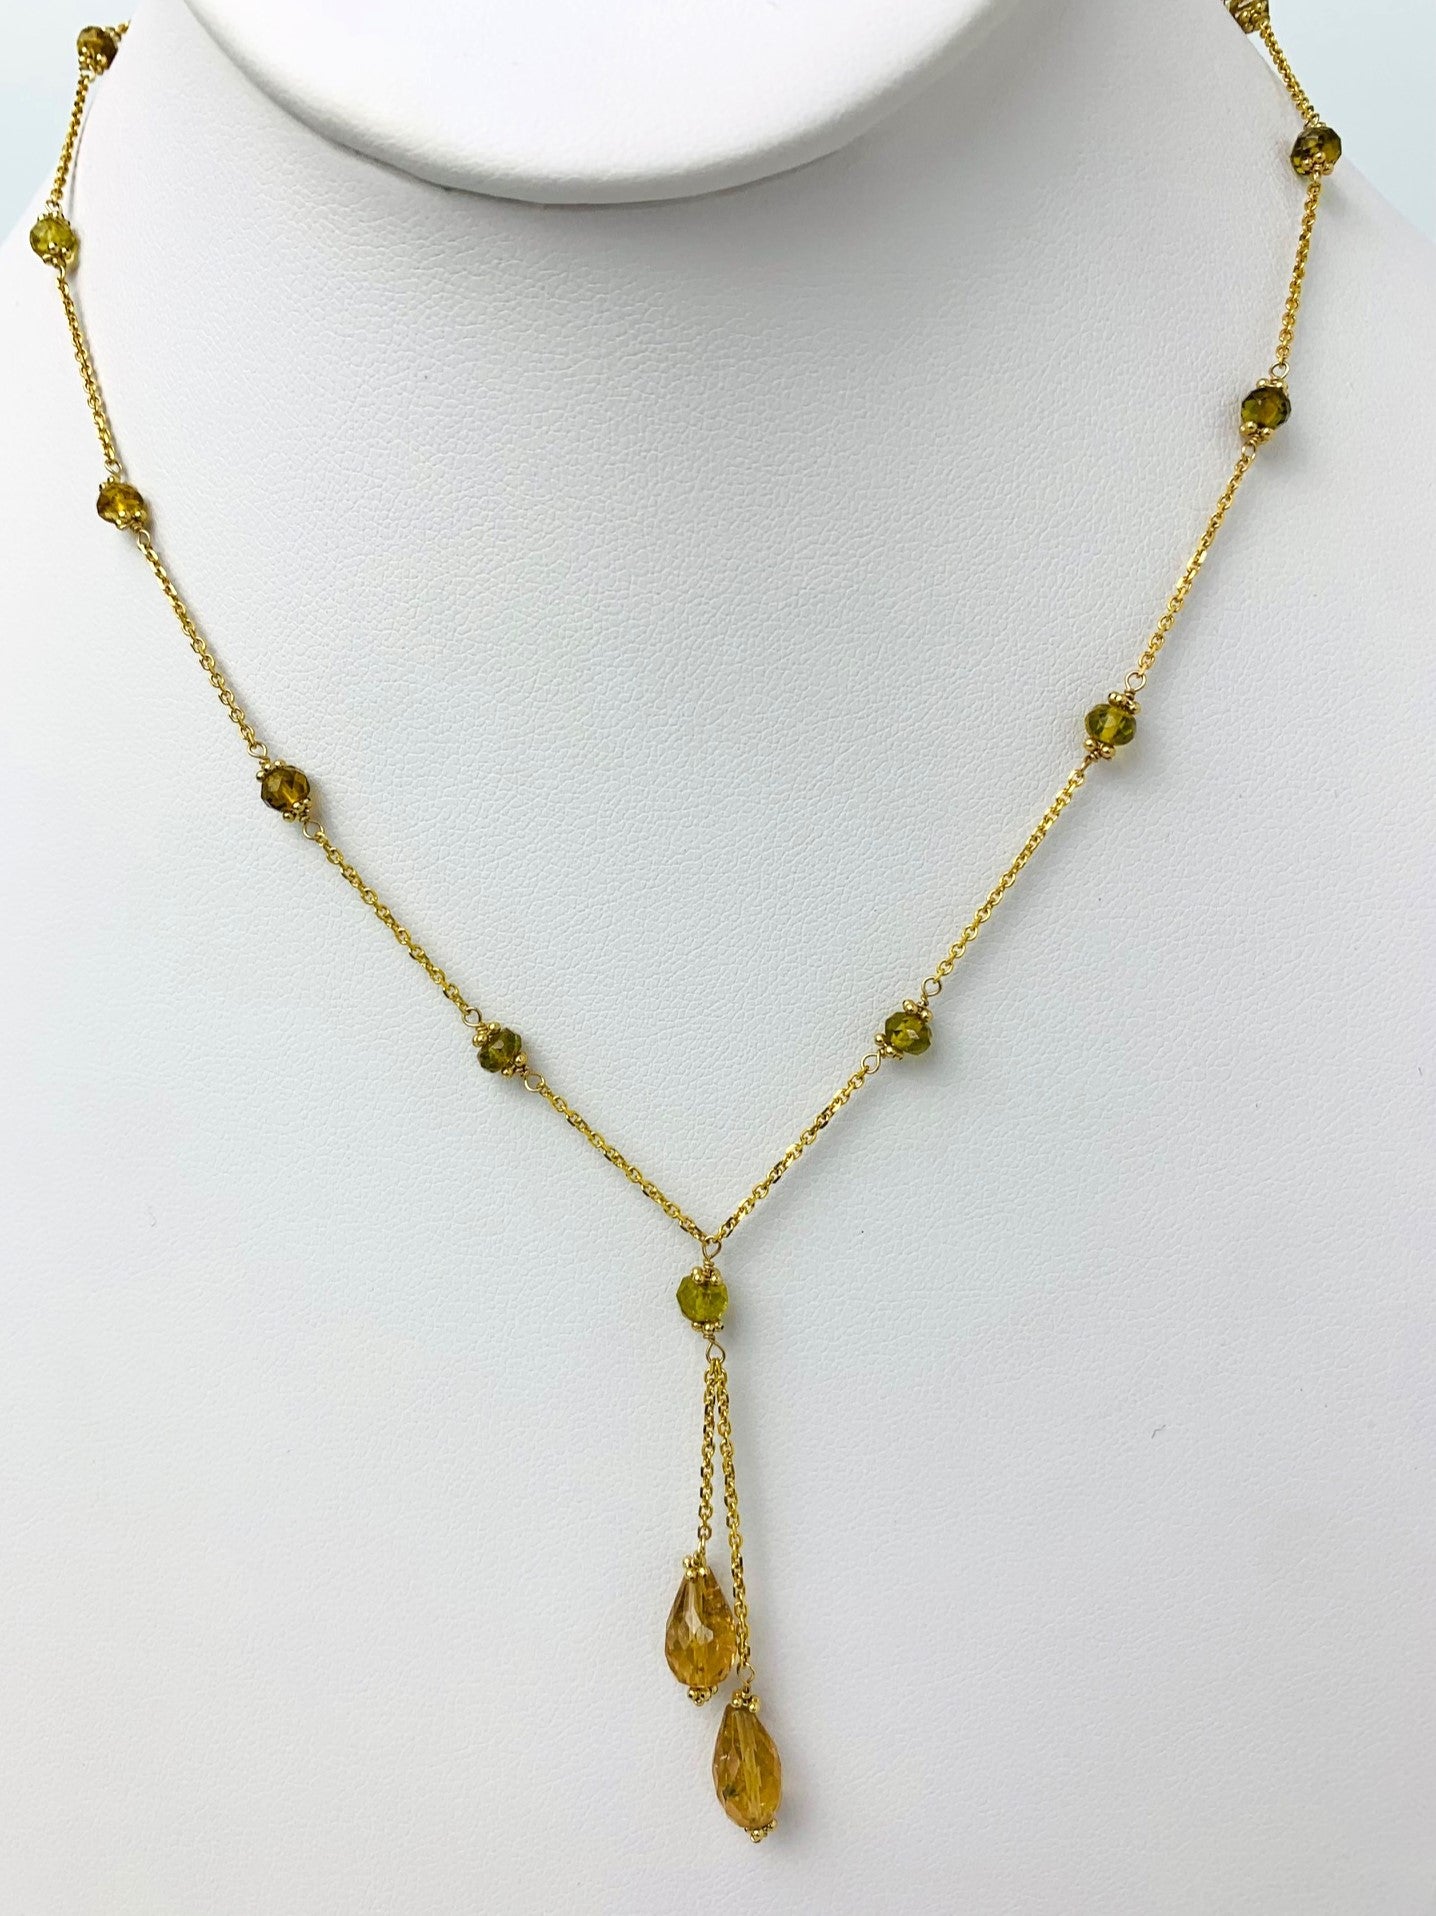 16" Green And Orange Tourmaline Station Lariat Necklace in 14KY - NCK-509-LARGM14Y-GT-16